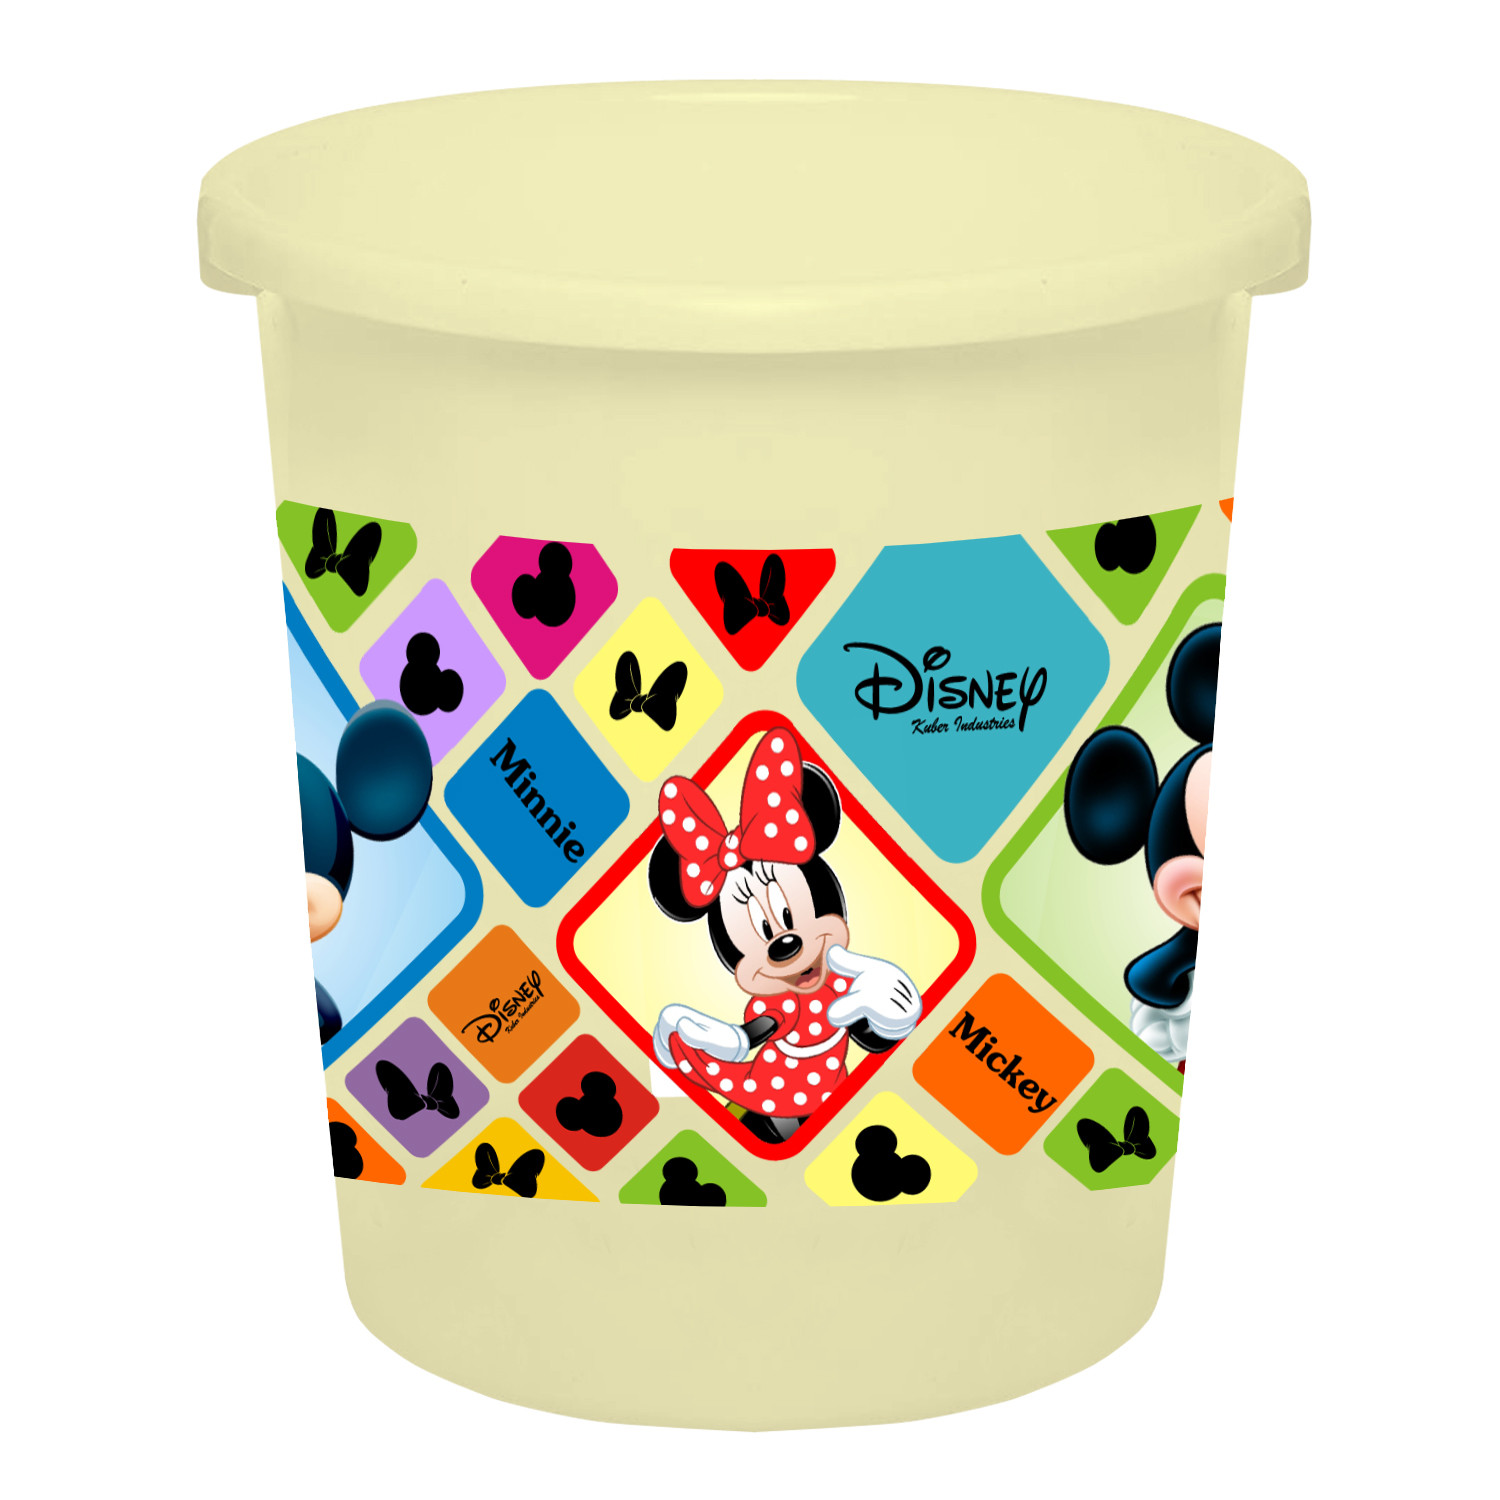 Kuber Industries Disney Mickey Minnie Print Plastic 3 Pieces Garbage Waste Dustbin/Recycling Bin for Home, Office, Factory, 5 Liters (Cream & Blue & White) -HS_35_KUBMART17813